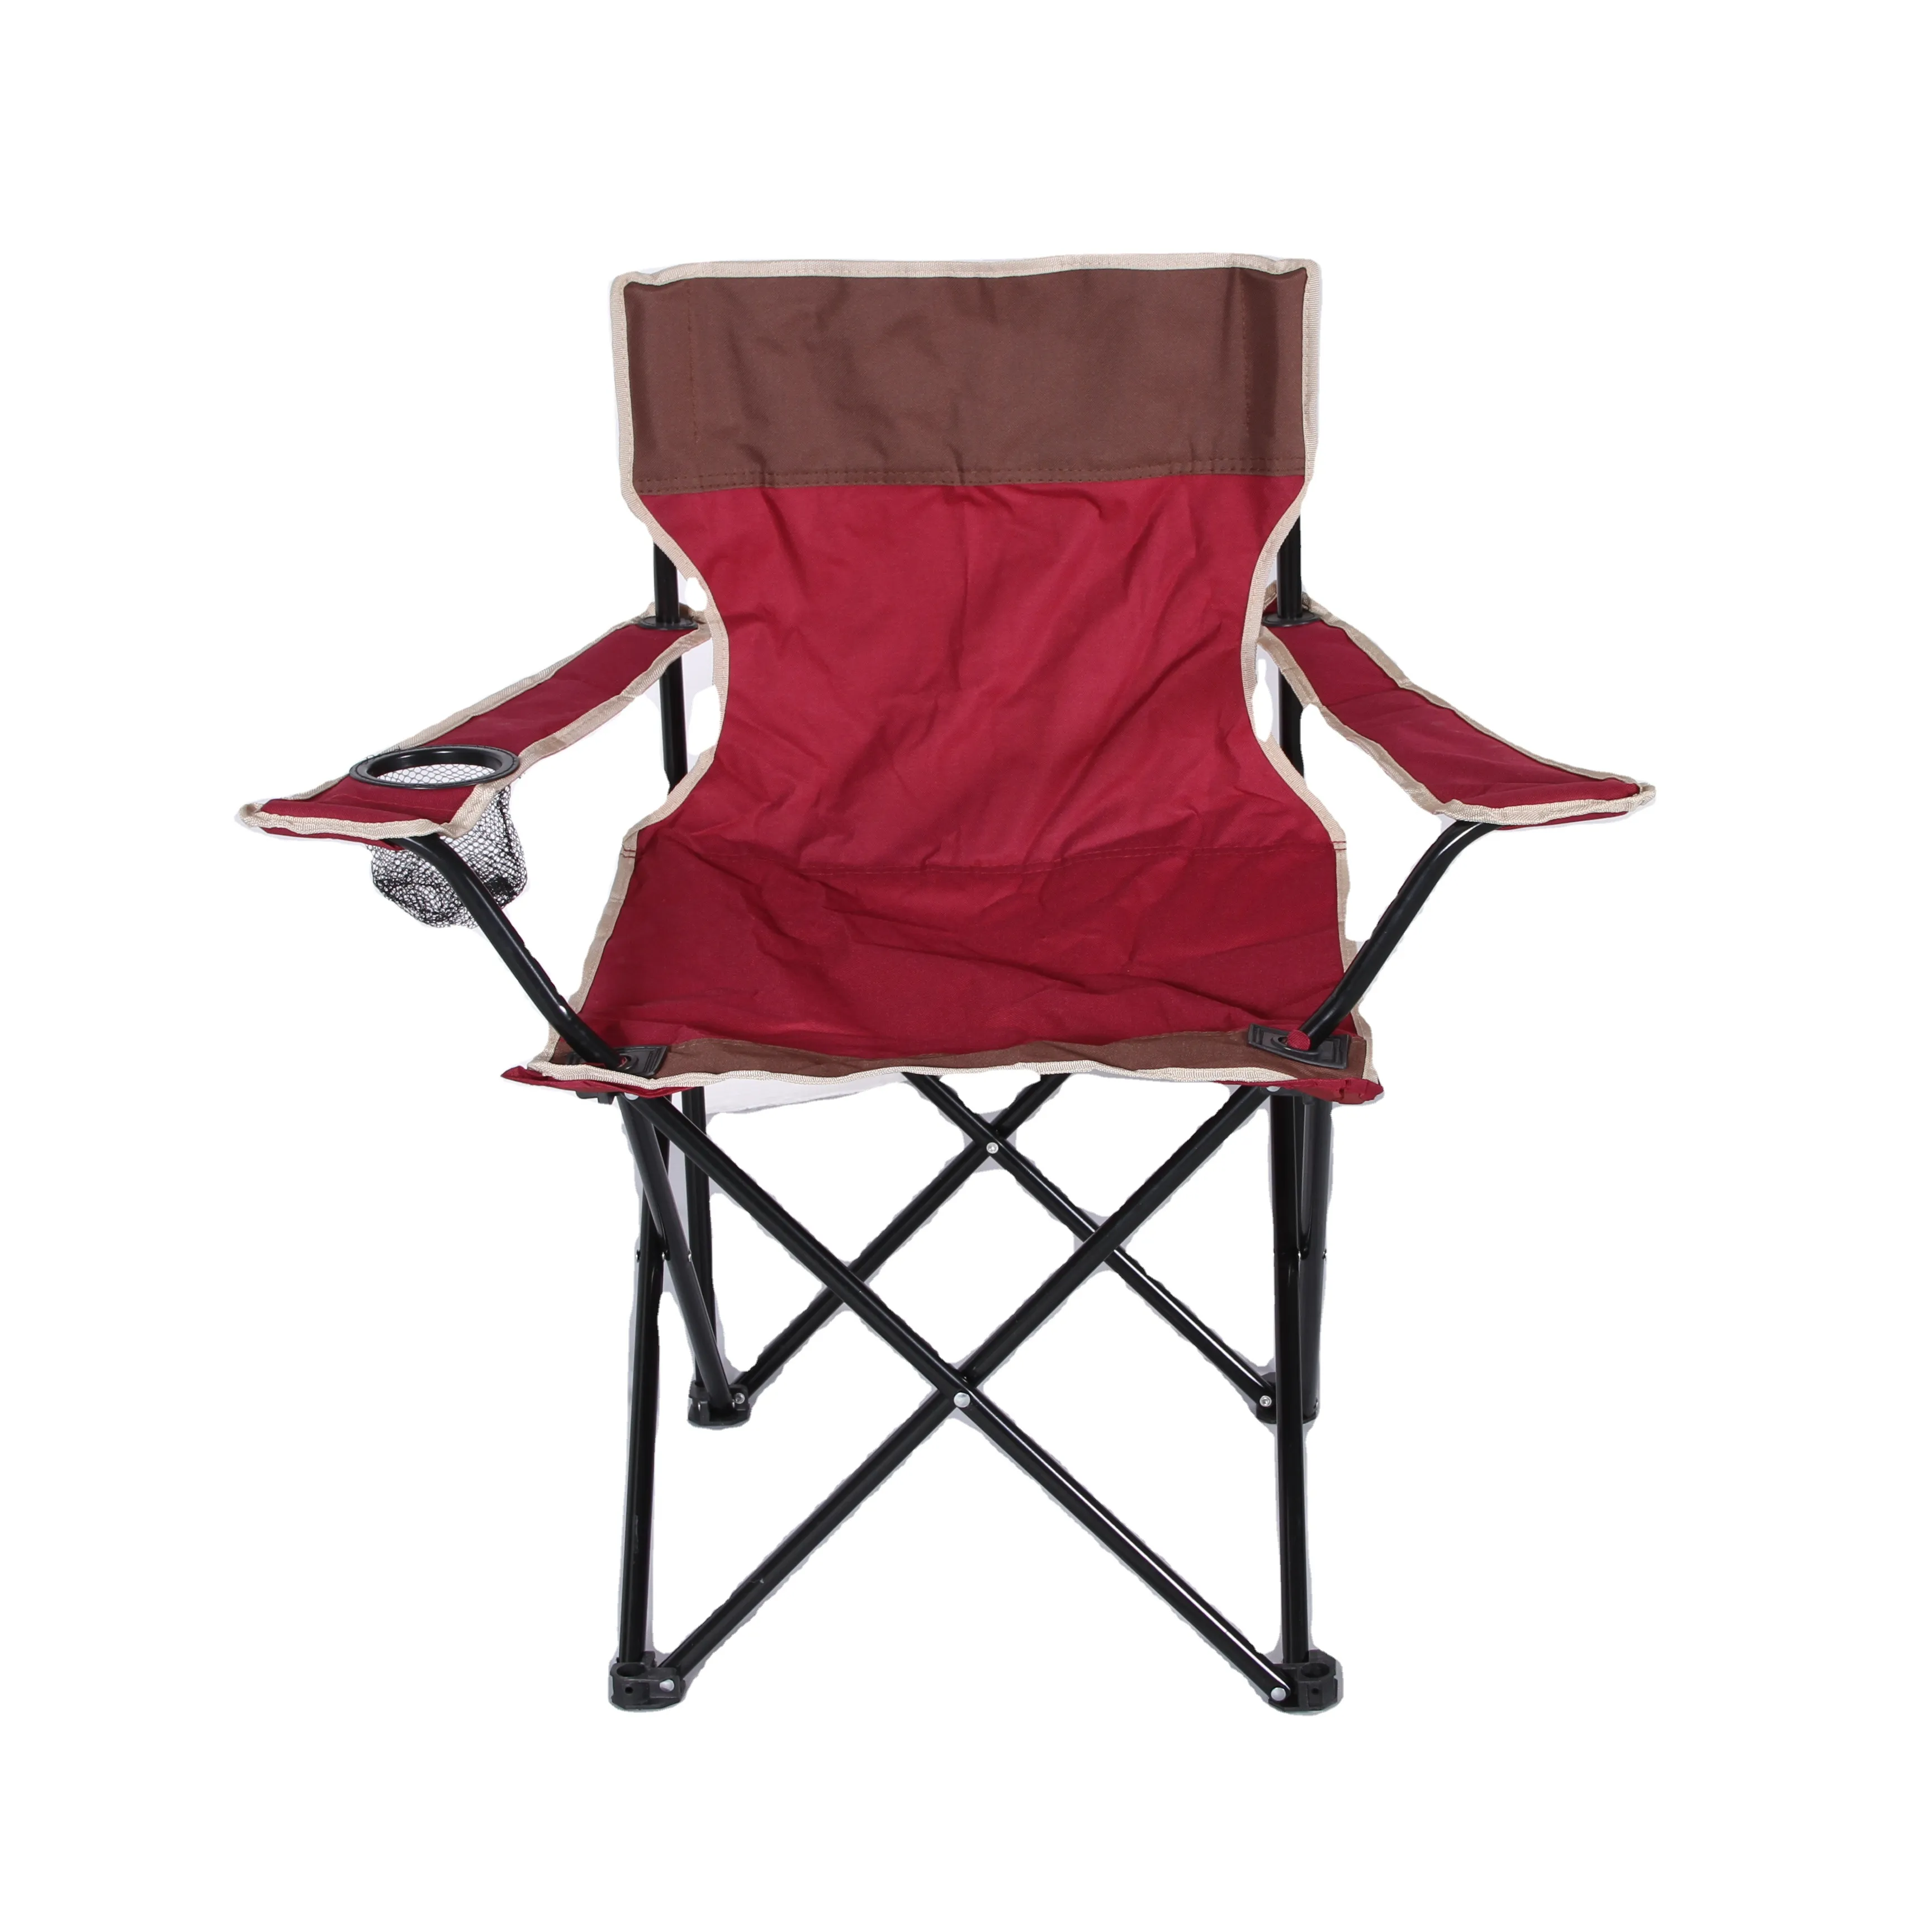 Folding camping armchair outdoor furniture armchair fishing tent chair beach chair camping